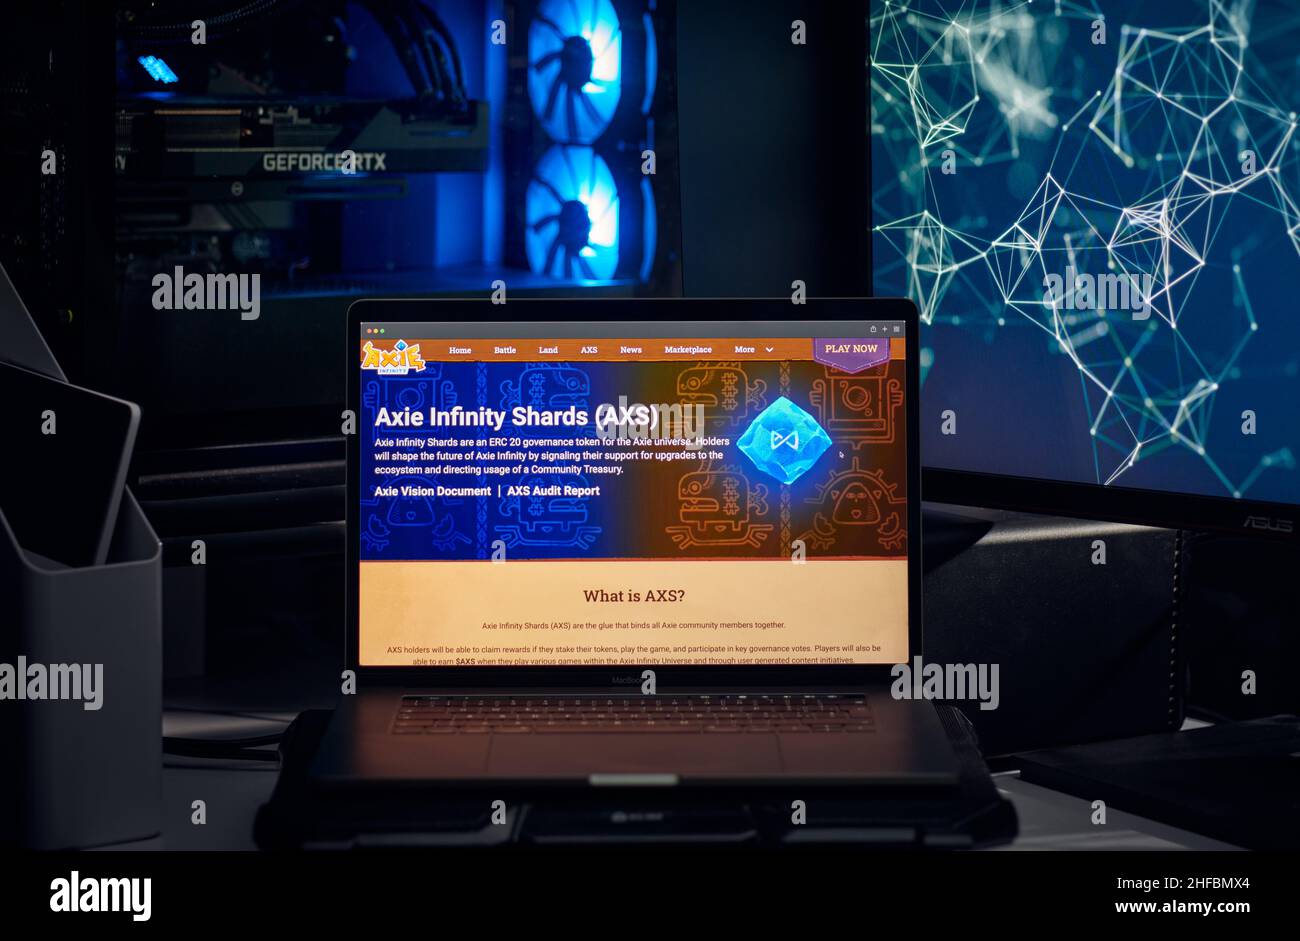 Milan, Italy - January 11, 2022: axie infinity - AXS website's hp seen on a laptop screen. axie infinity, AXS coin logo visible. Cryptocurrency, defi, Stock Photo